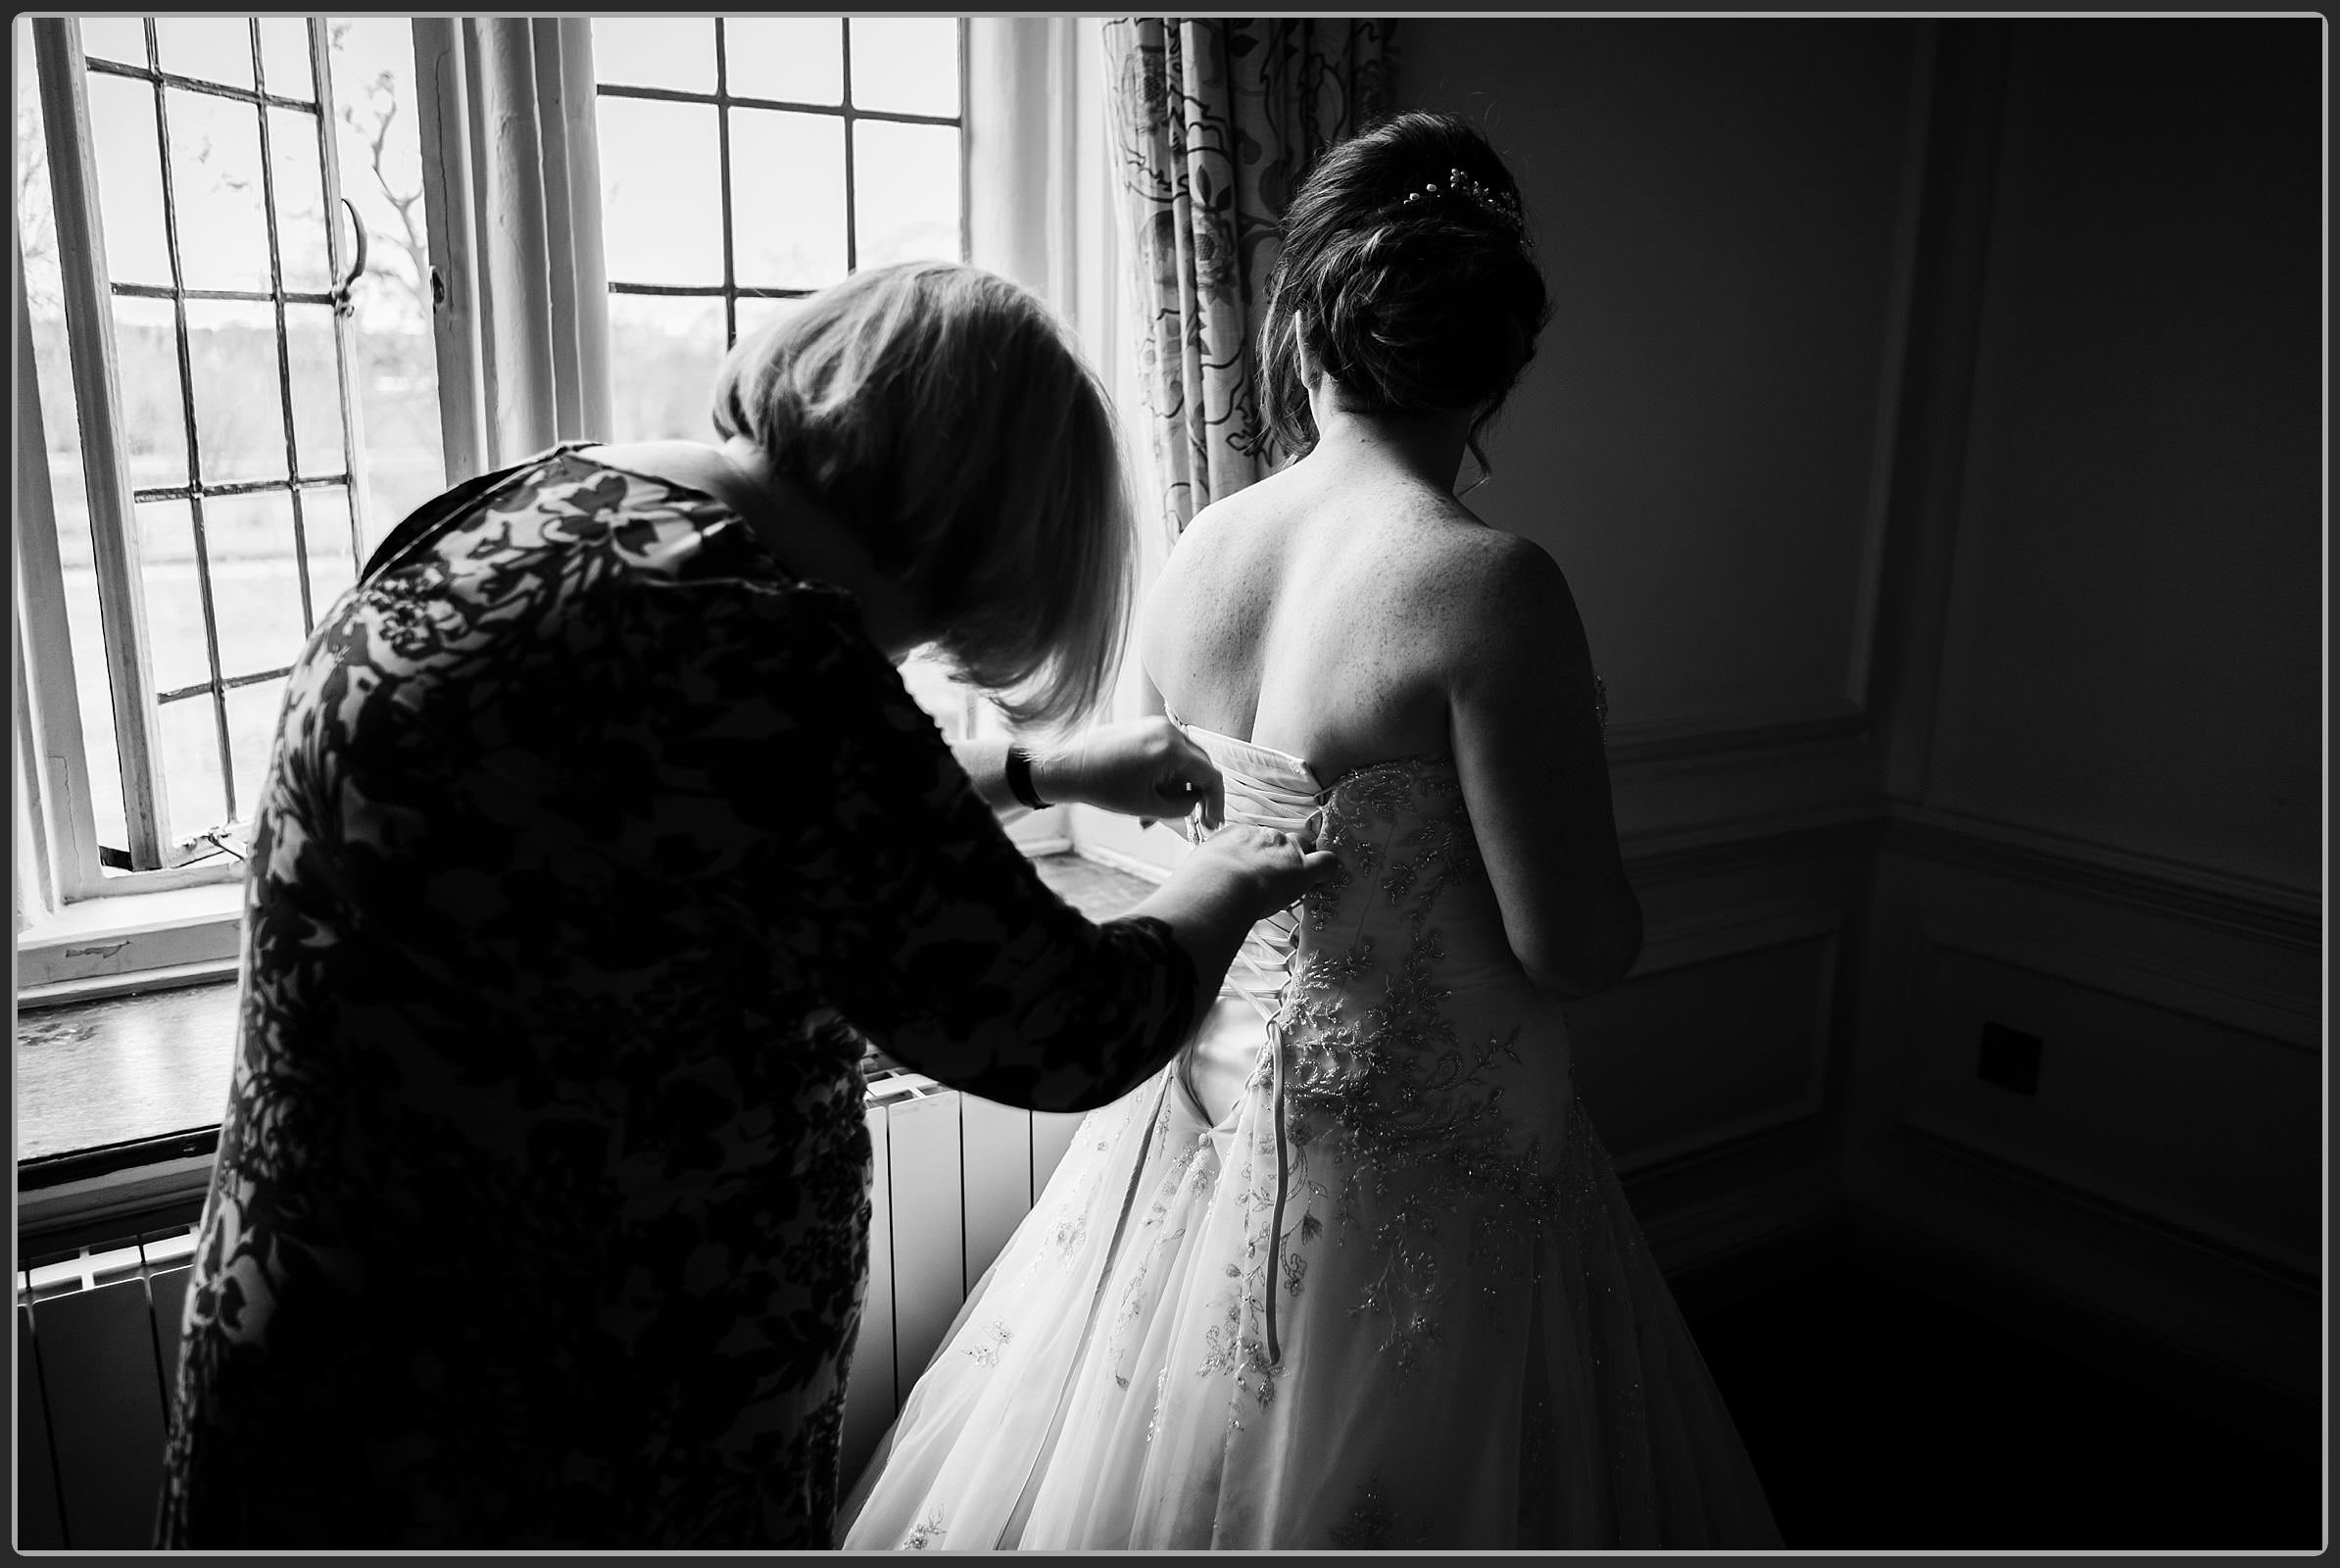 The bride having her dress done up